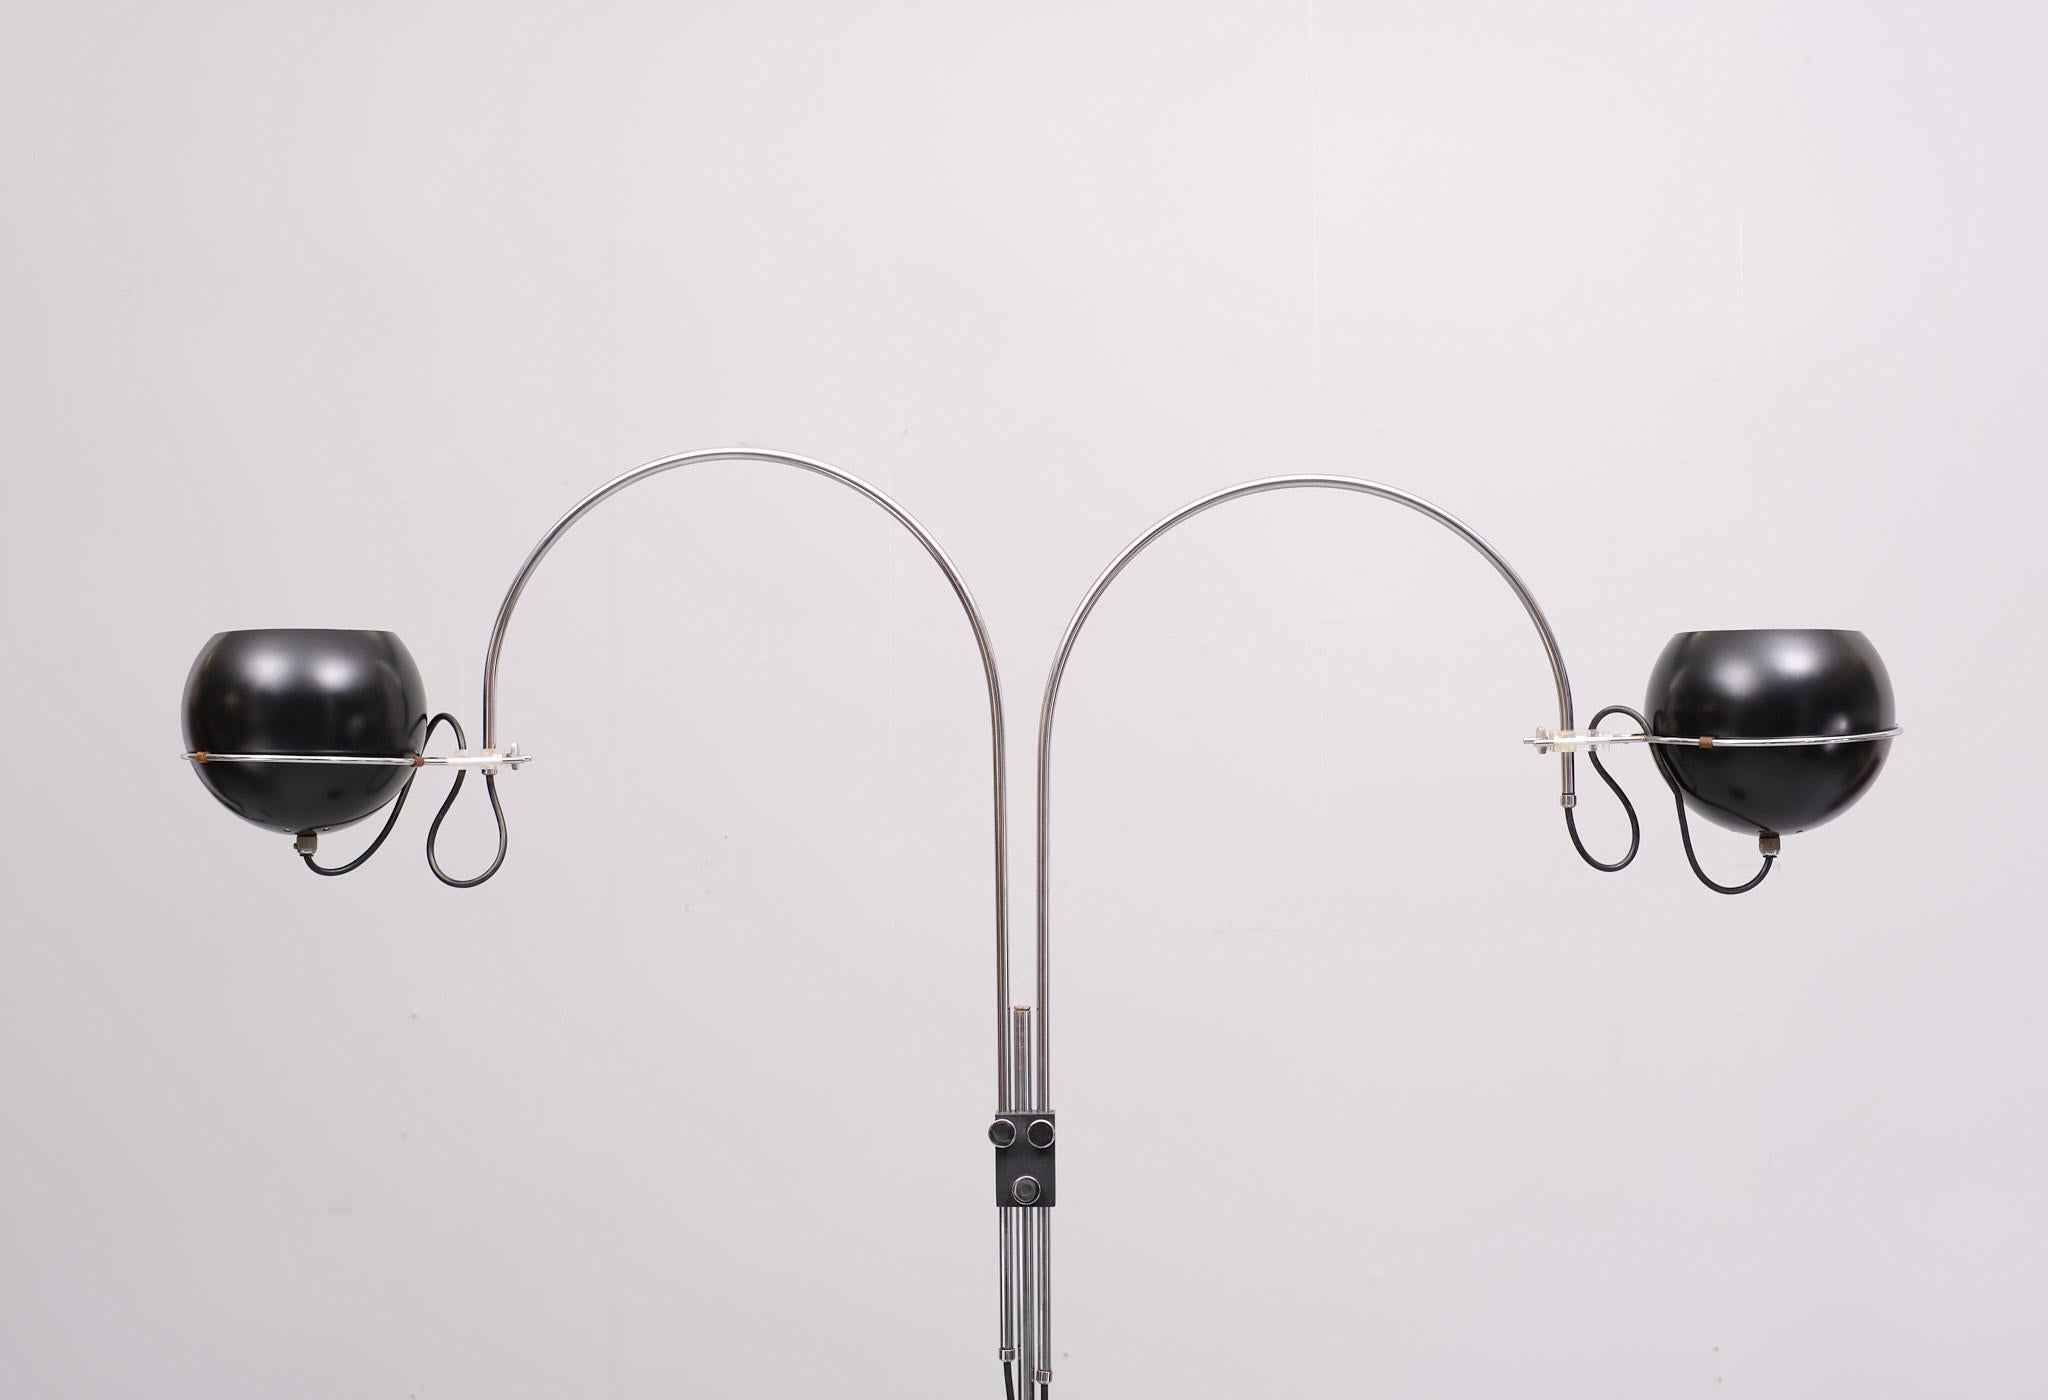 Mid Century Modern GEPO Amsterdam  Double Arc Space Age Eyeball Floor Lamp.
The arcs can be adjusted in height and turned all around. The Black eyeball shades can be positioned inside or outside the arcs and placed in the rings in any direction